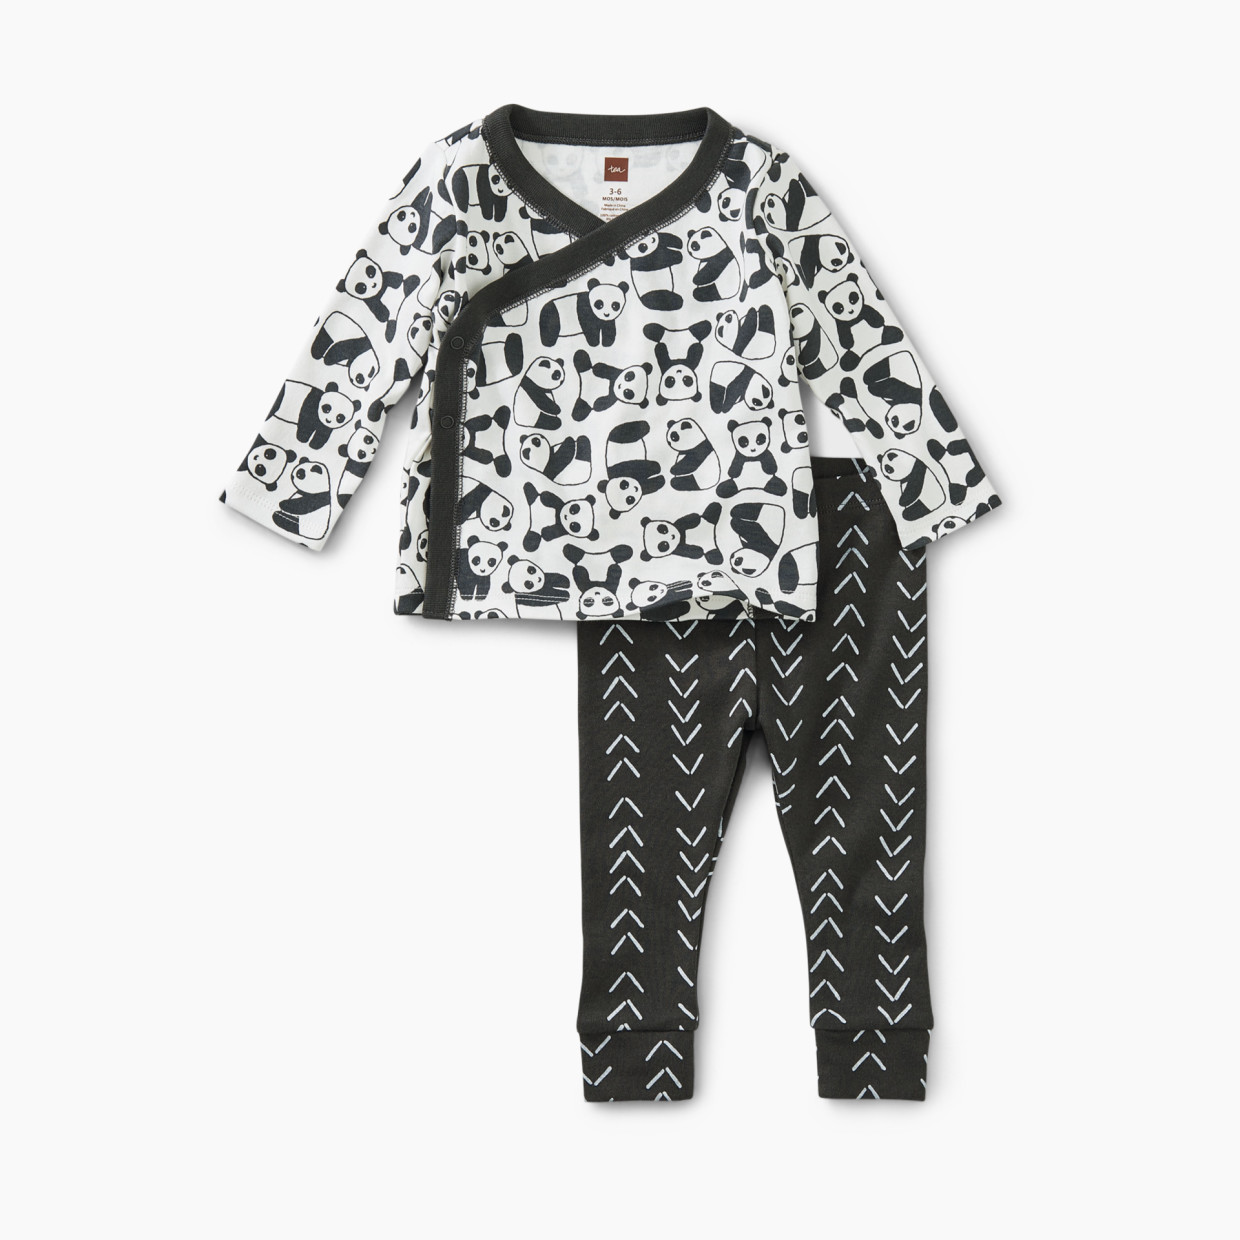 Tea Collection Wrap Top Baby Outfit - Panda Pups, 0-3 Months.